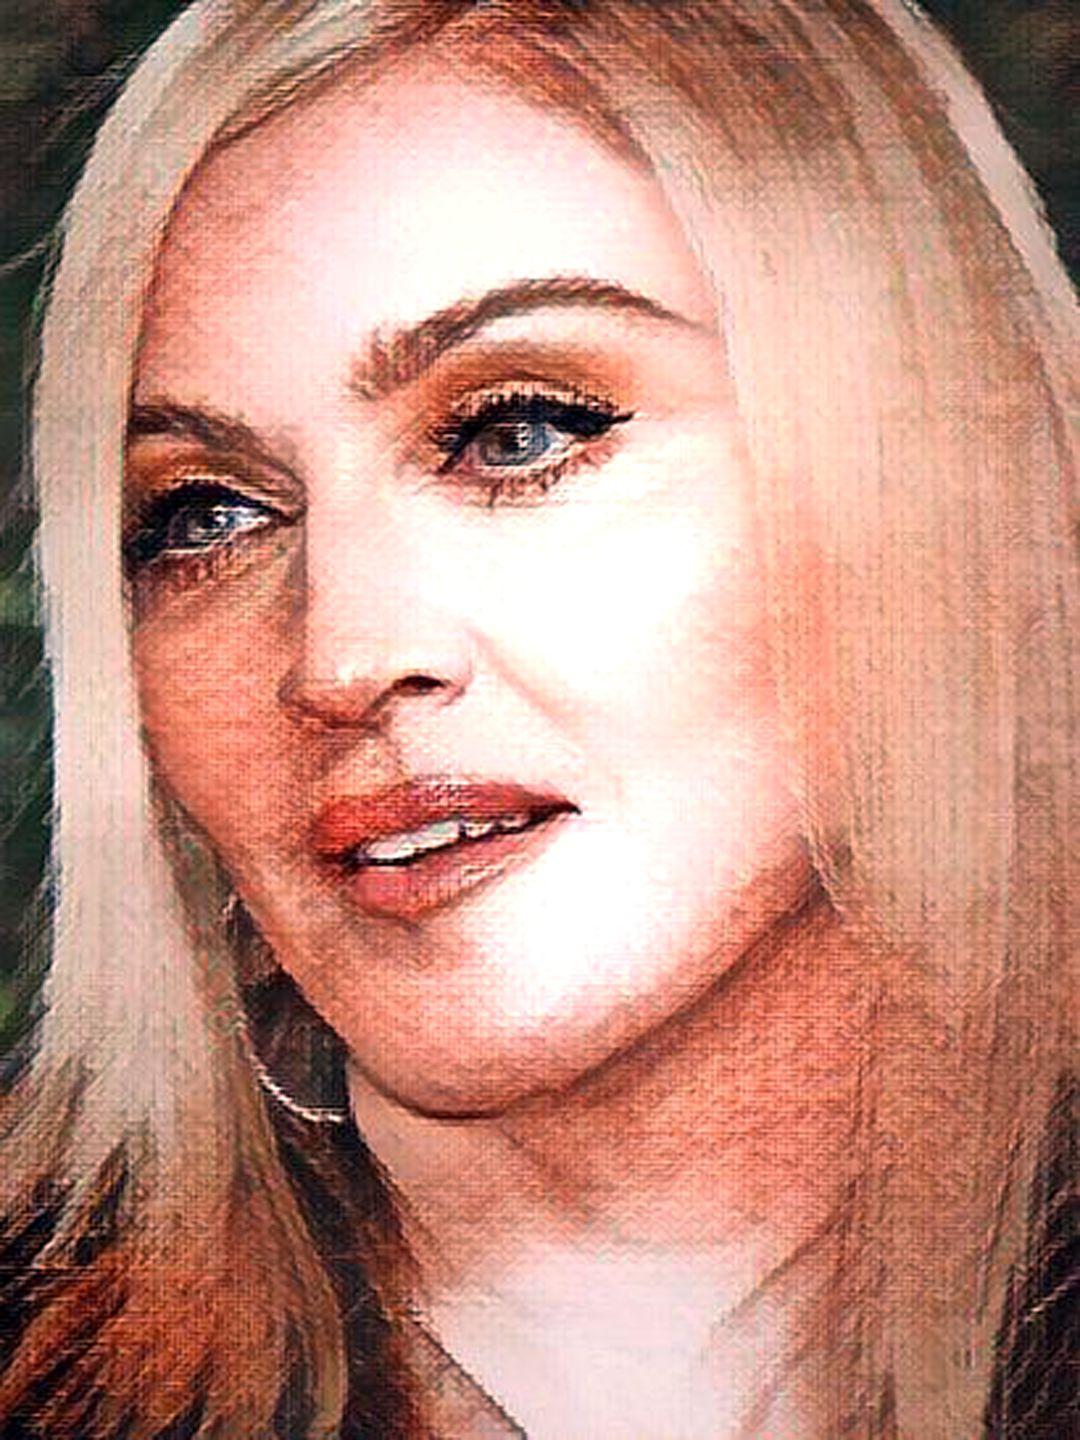 Ann Curry Hairy Pussy - Madonna # 36 - Celeb ART - Beautiful Artworks of Celebrities, Footballers,  Politicians and Famous People in World | OpenSea